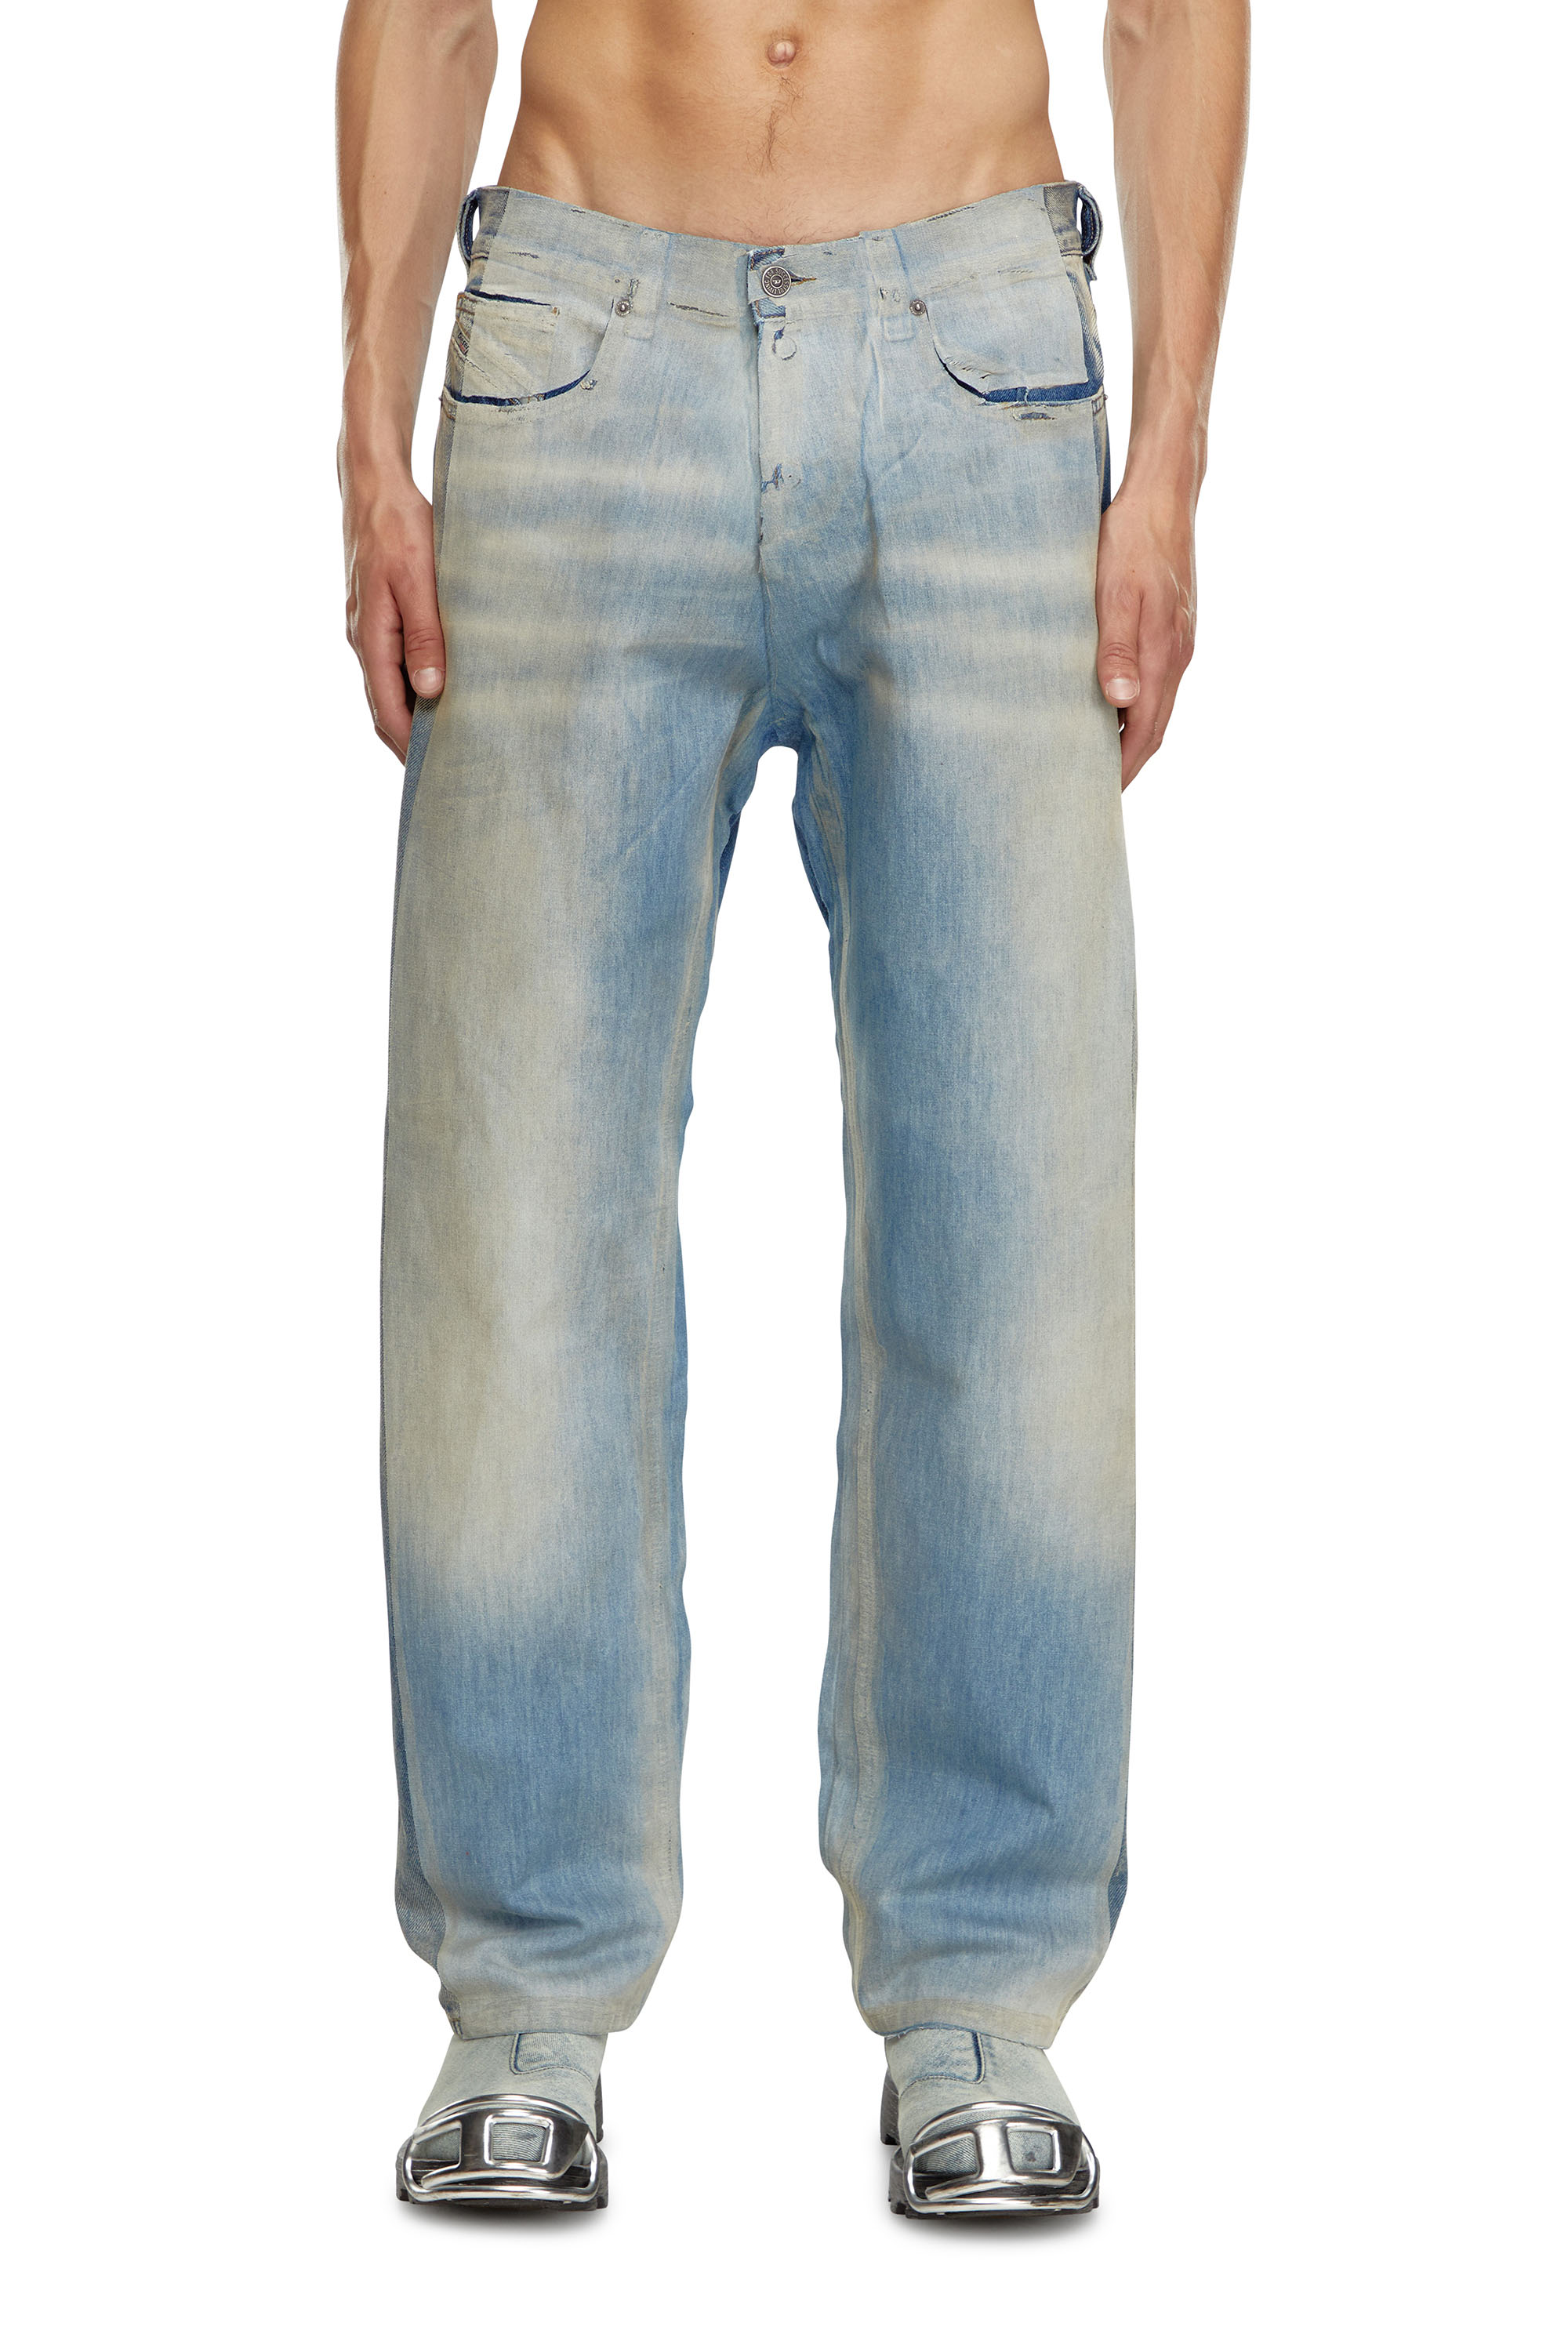 Diesel - Straight Jeans 2010 D-Macs 09K22, Hombre Straight Jeans - 2010 D-Macs in Azul marino - Image 1